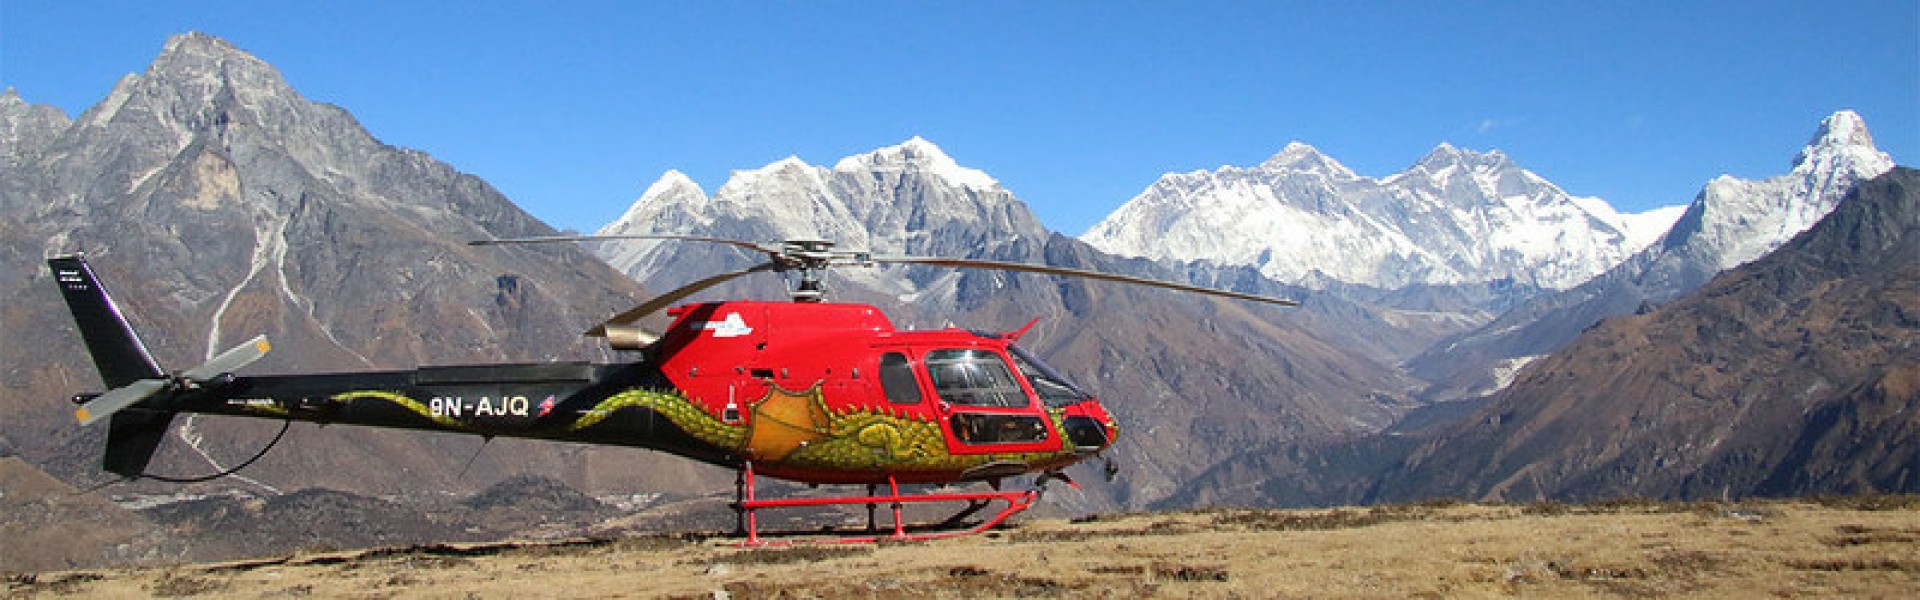 Reasons to do Helicopter Tours in Nepal